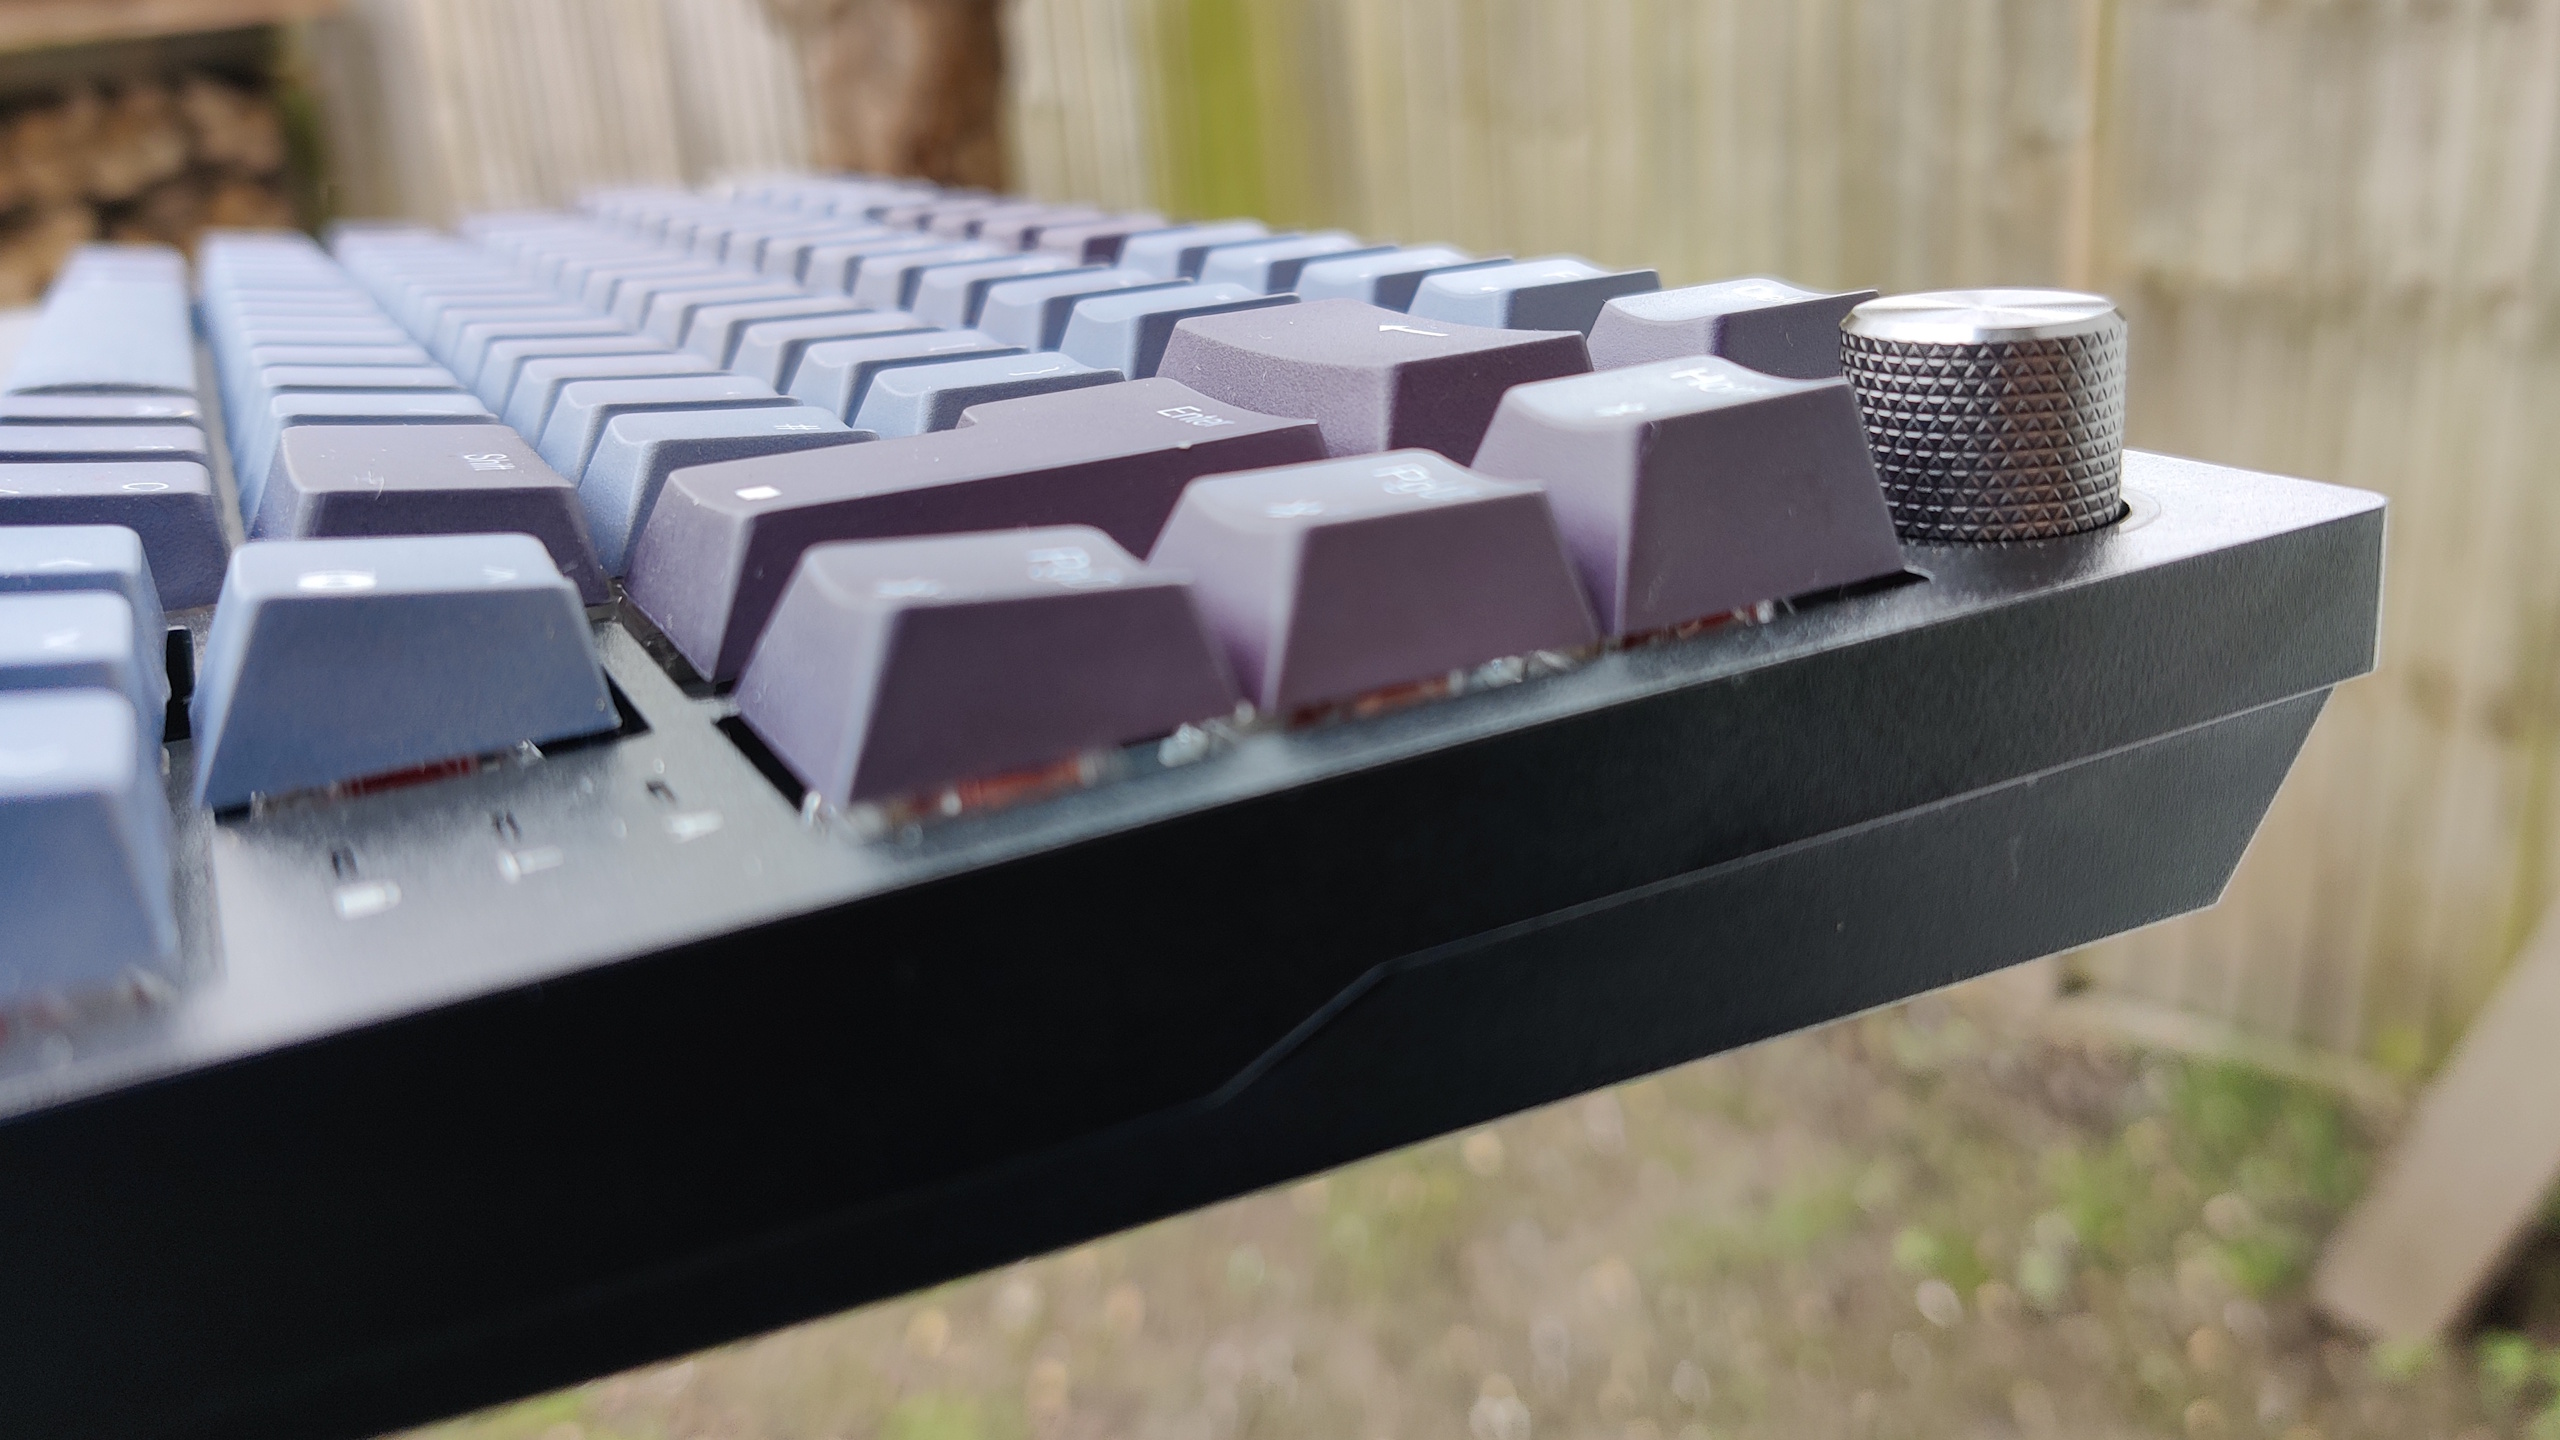 Corsair K65 pictured outdoors with black and grey keycaps.